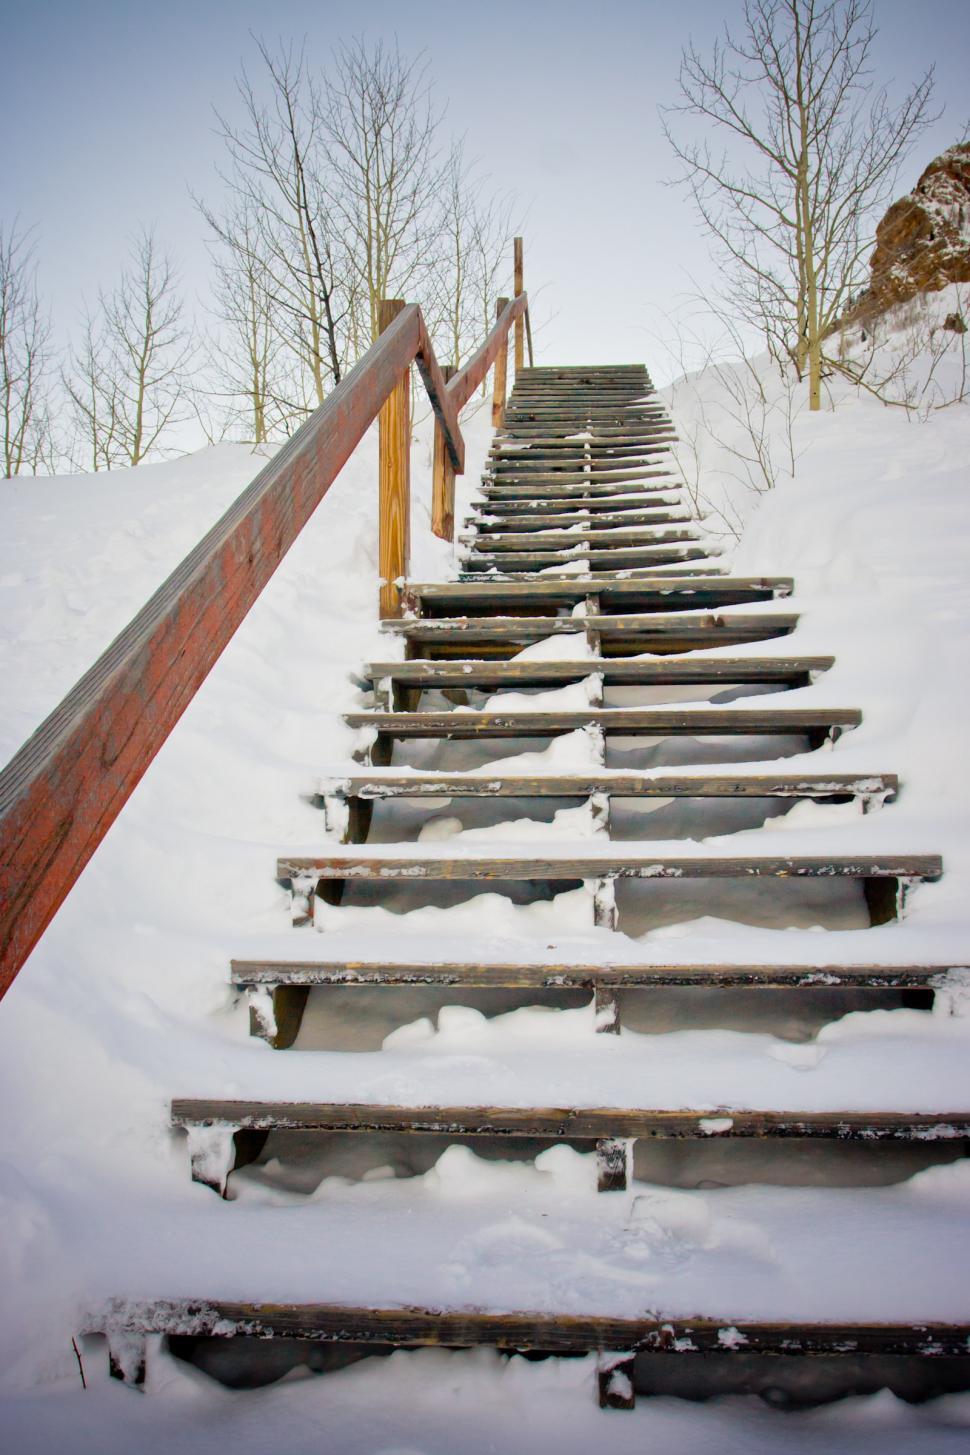 Download Free Stock Photo of Snowy steps 